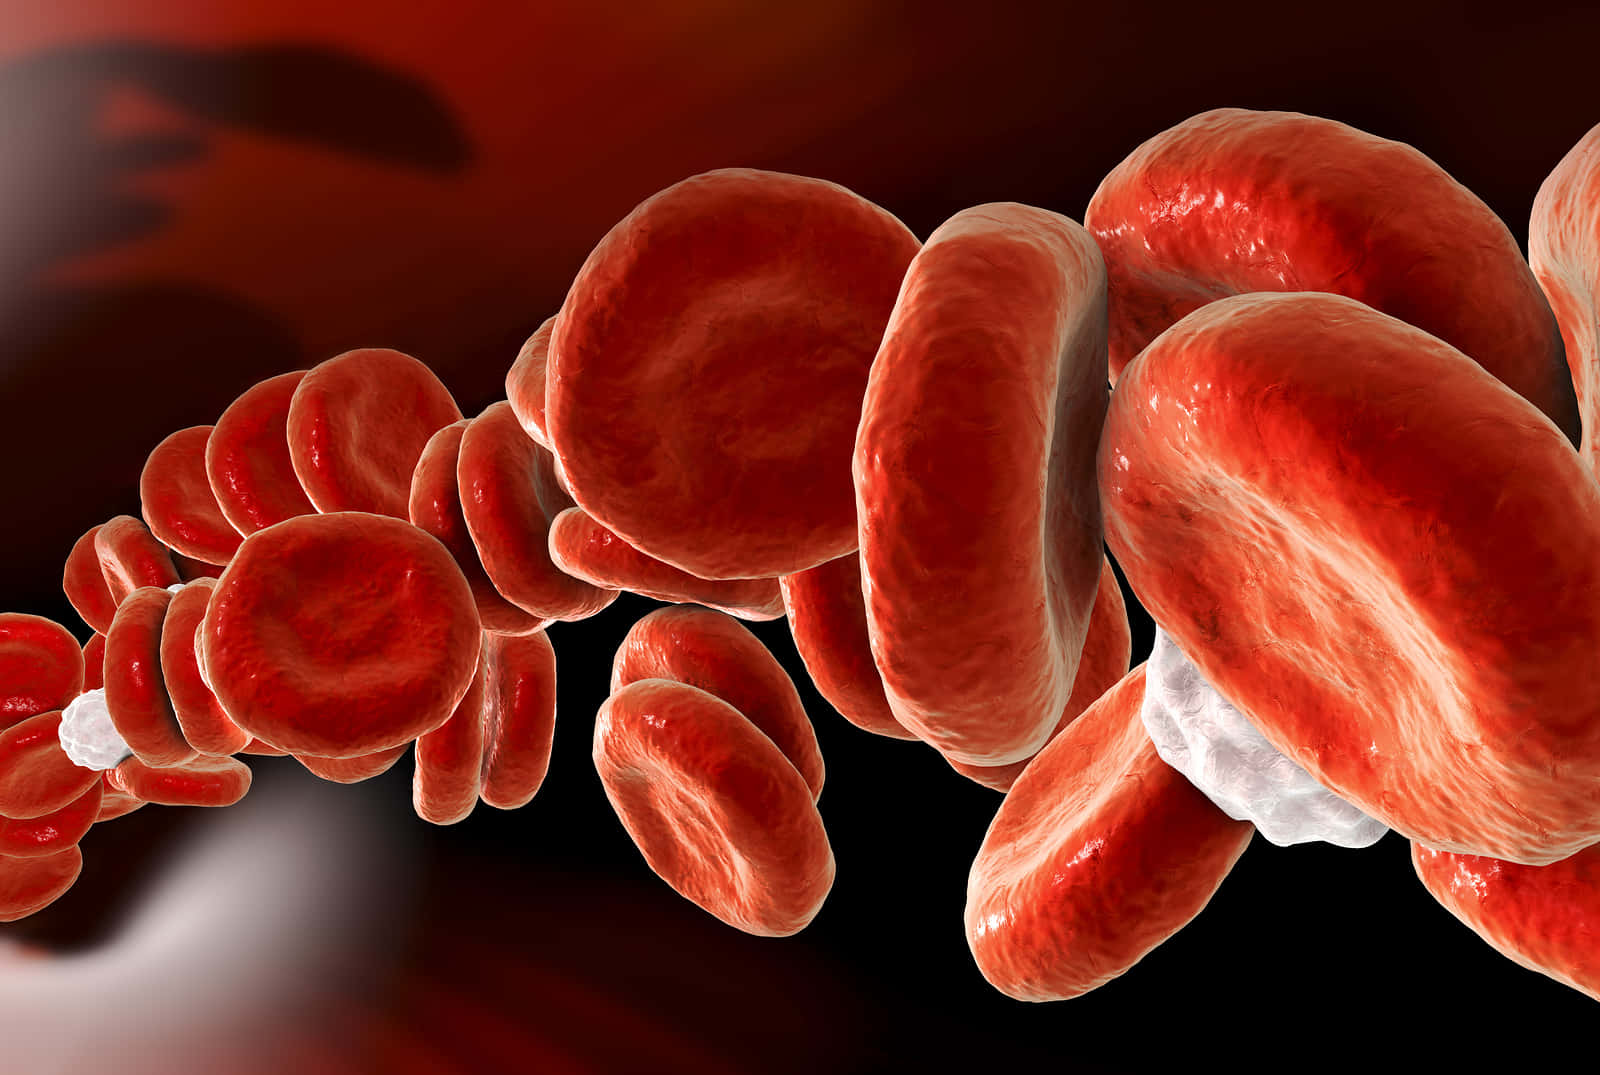 Close-up view of red blood cells in the human body Wallpaper